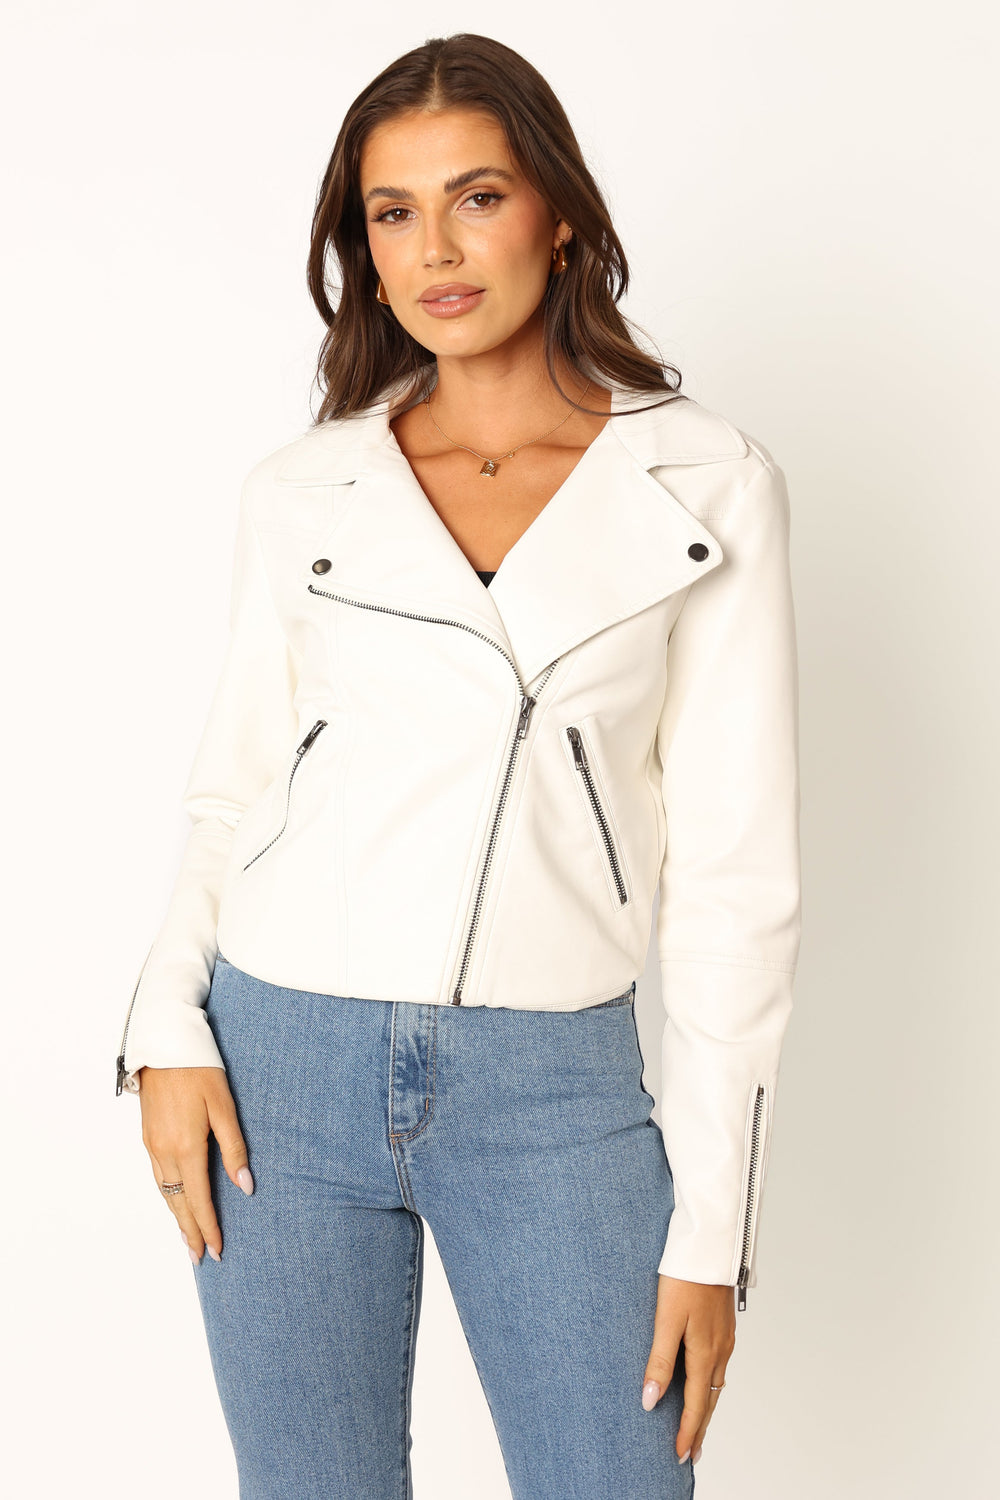 Petal and Pup USA OUTERWEAR Salem Faux Leather Moto Jacket - White